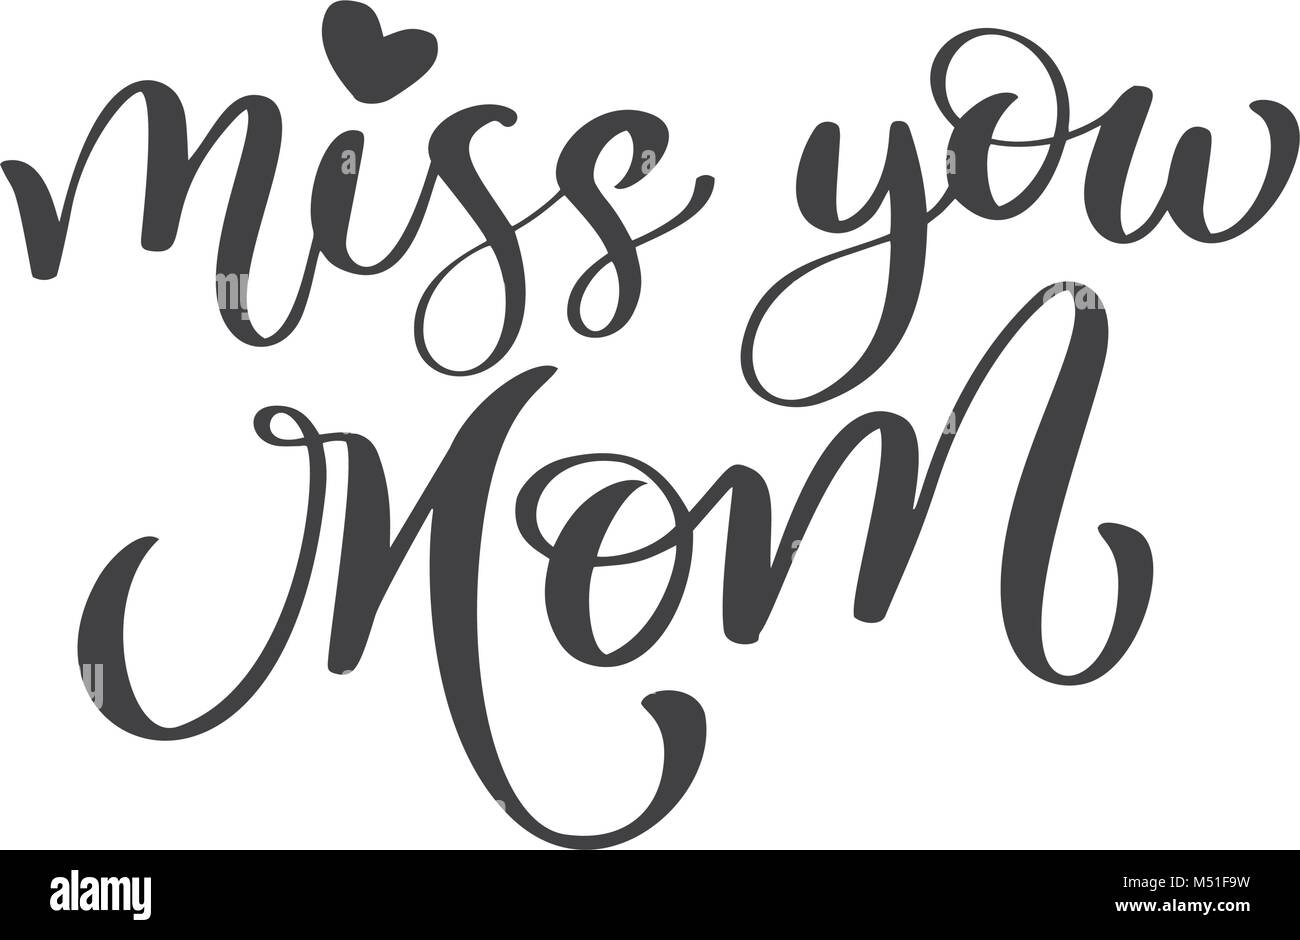 Miss you mom text. Hand drawn lettering design. Happy Mother s Day ...